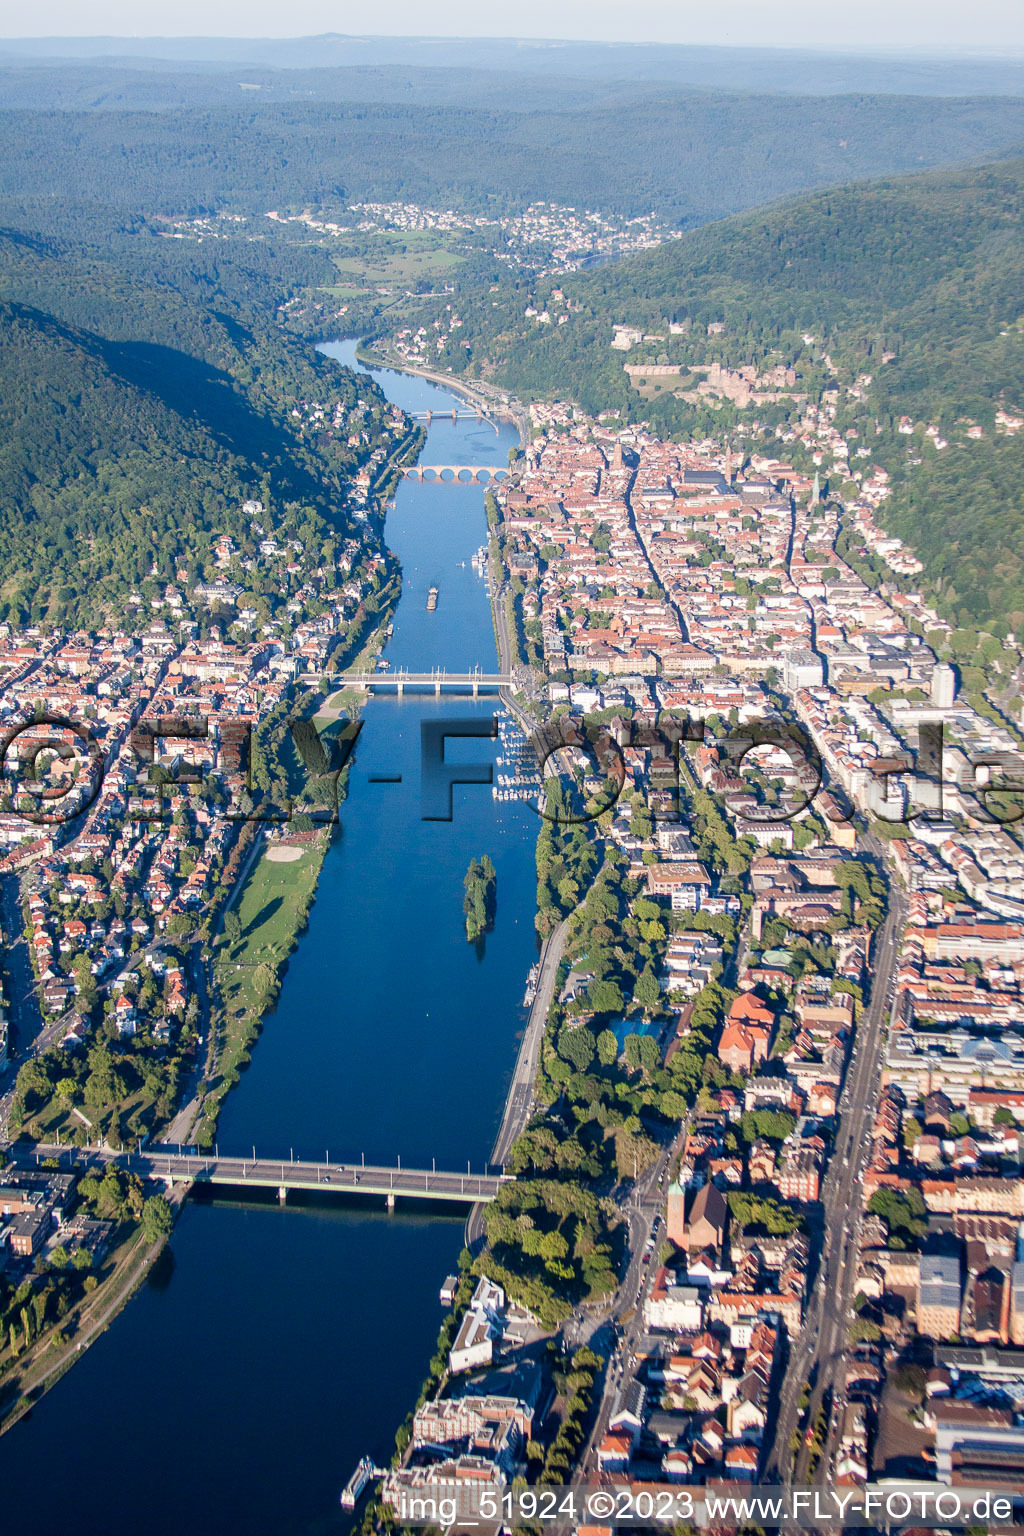 Aerial view of Village on the banks of the area Neckar river course in Heidelberg in the state Baden-Wurttemberg